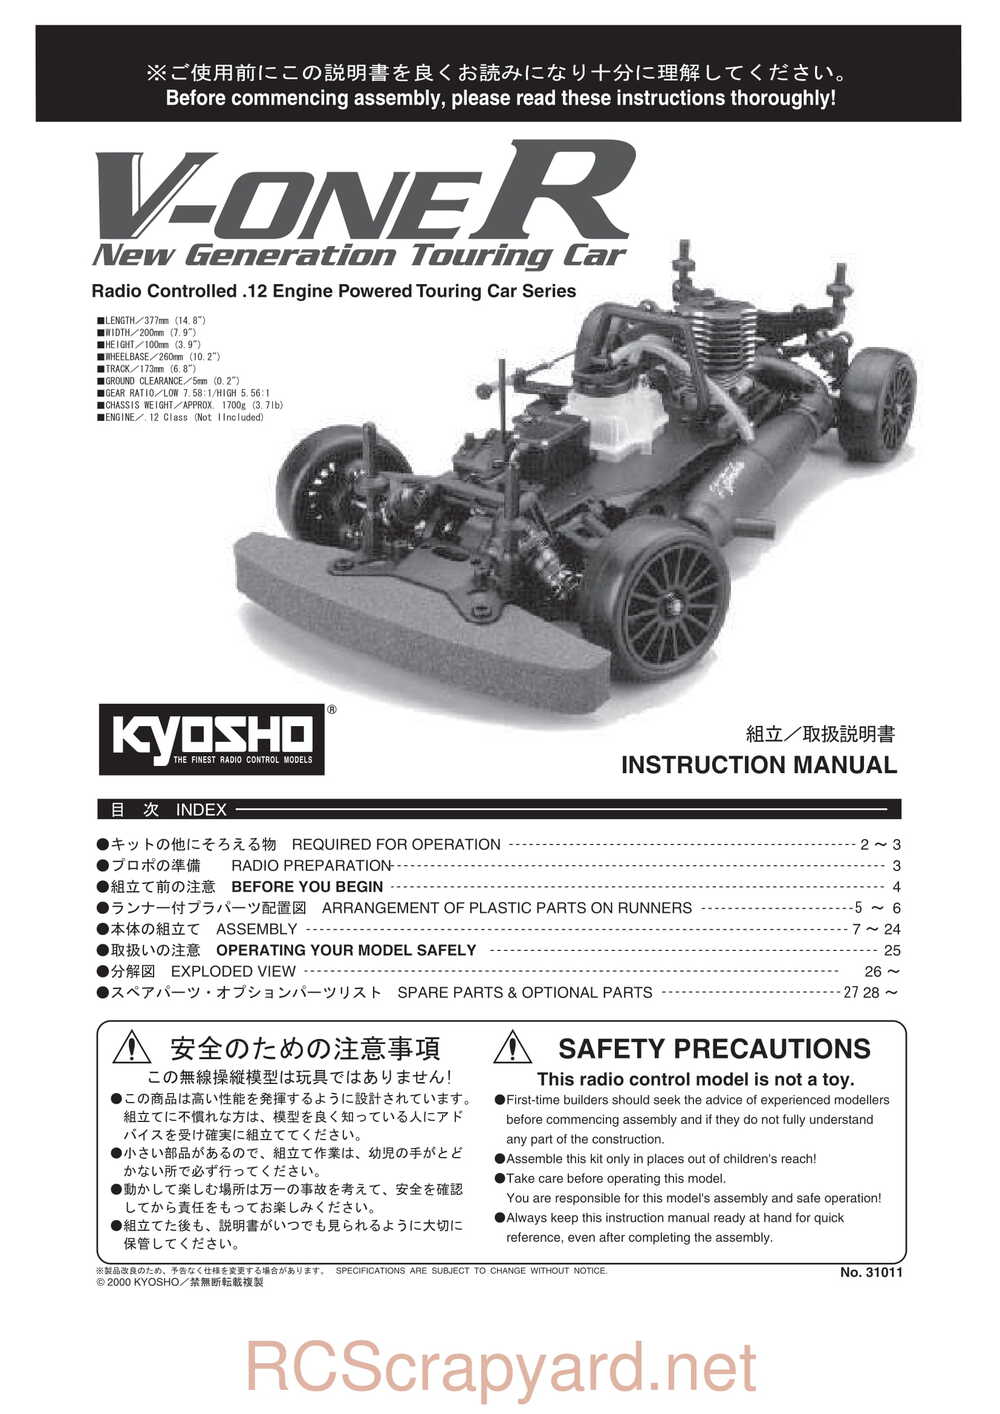 Kyosho - 31011 - V-One R - Manual - Page 01